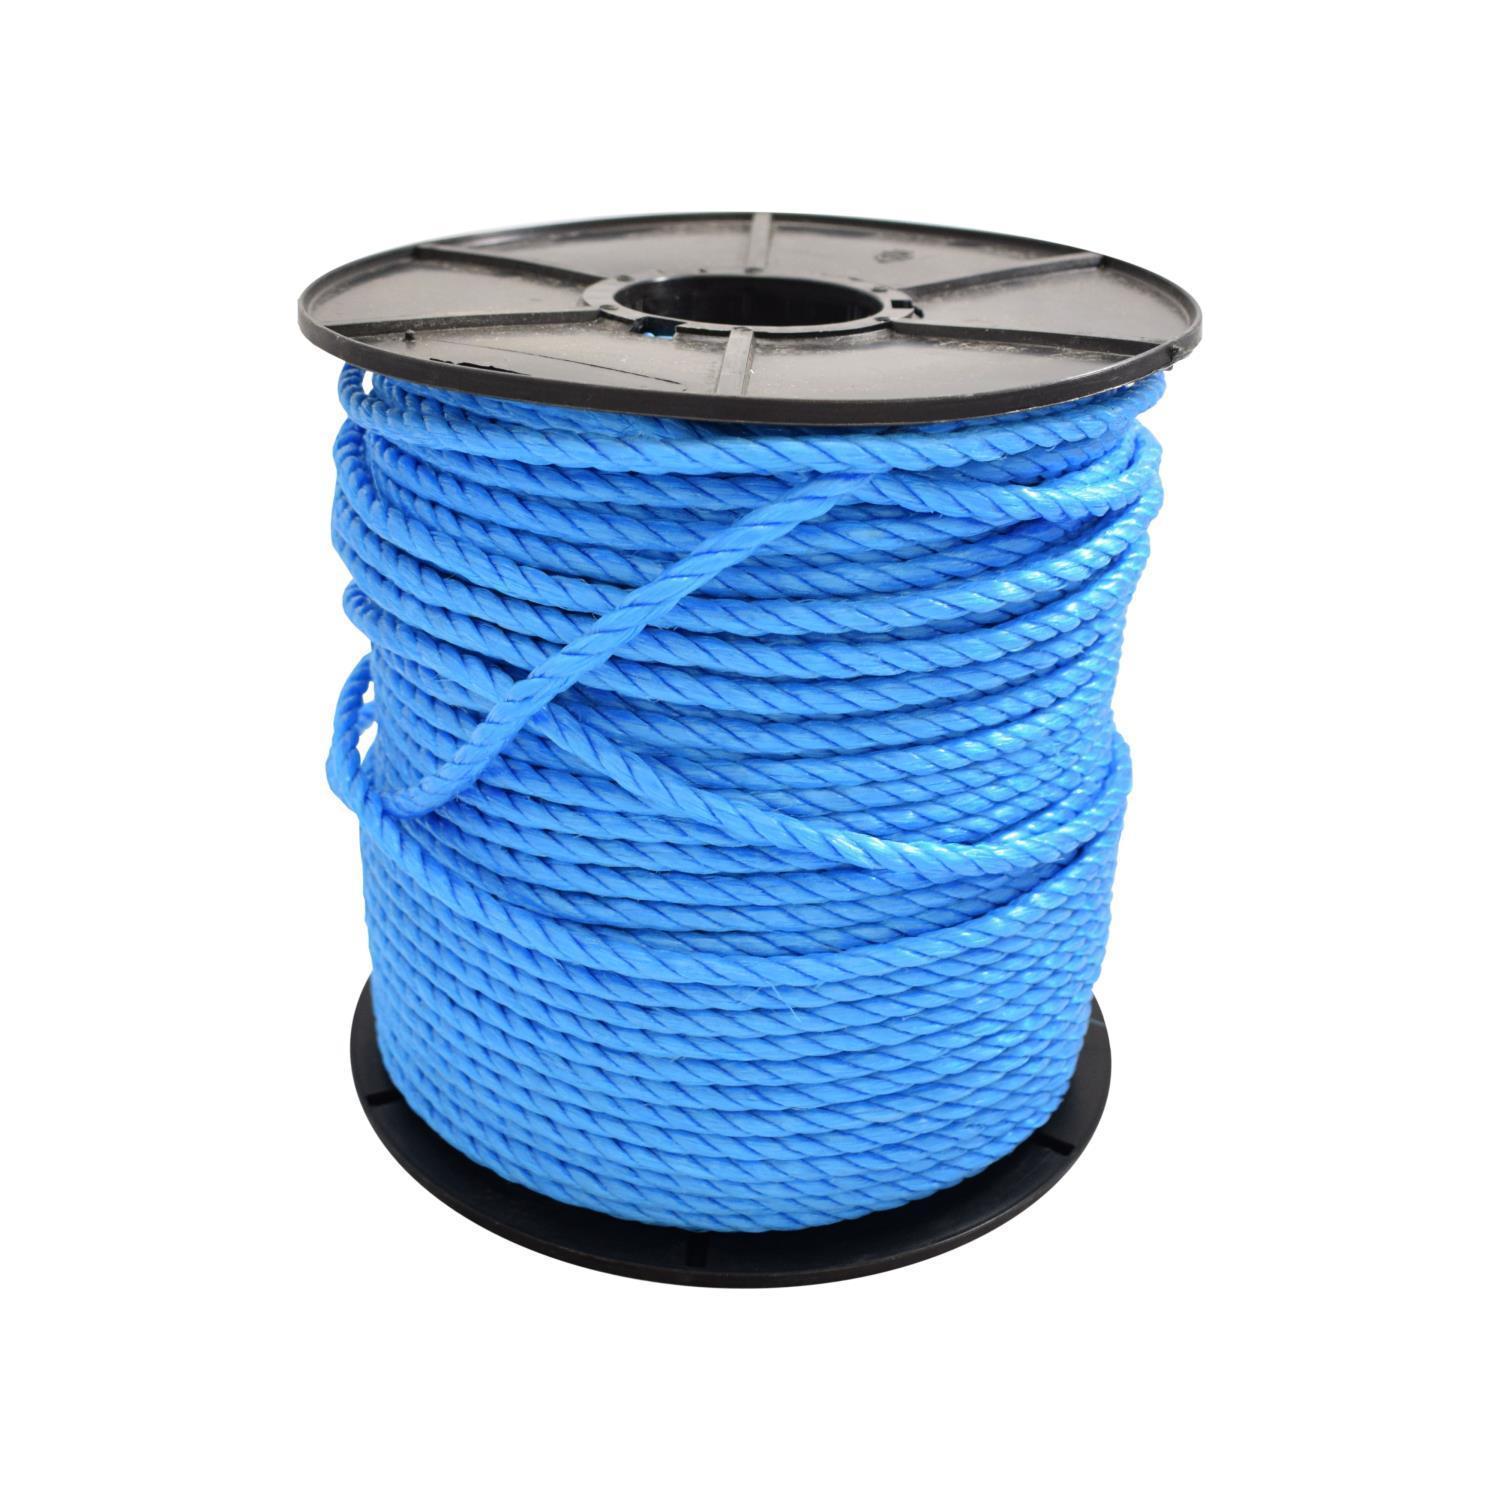 Buy Polypropylene Rope 8mm x 220m from Fane Valley Stores Agricultural ...